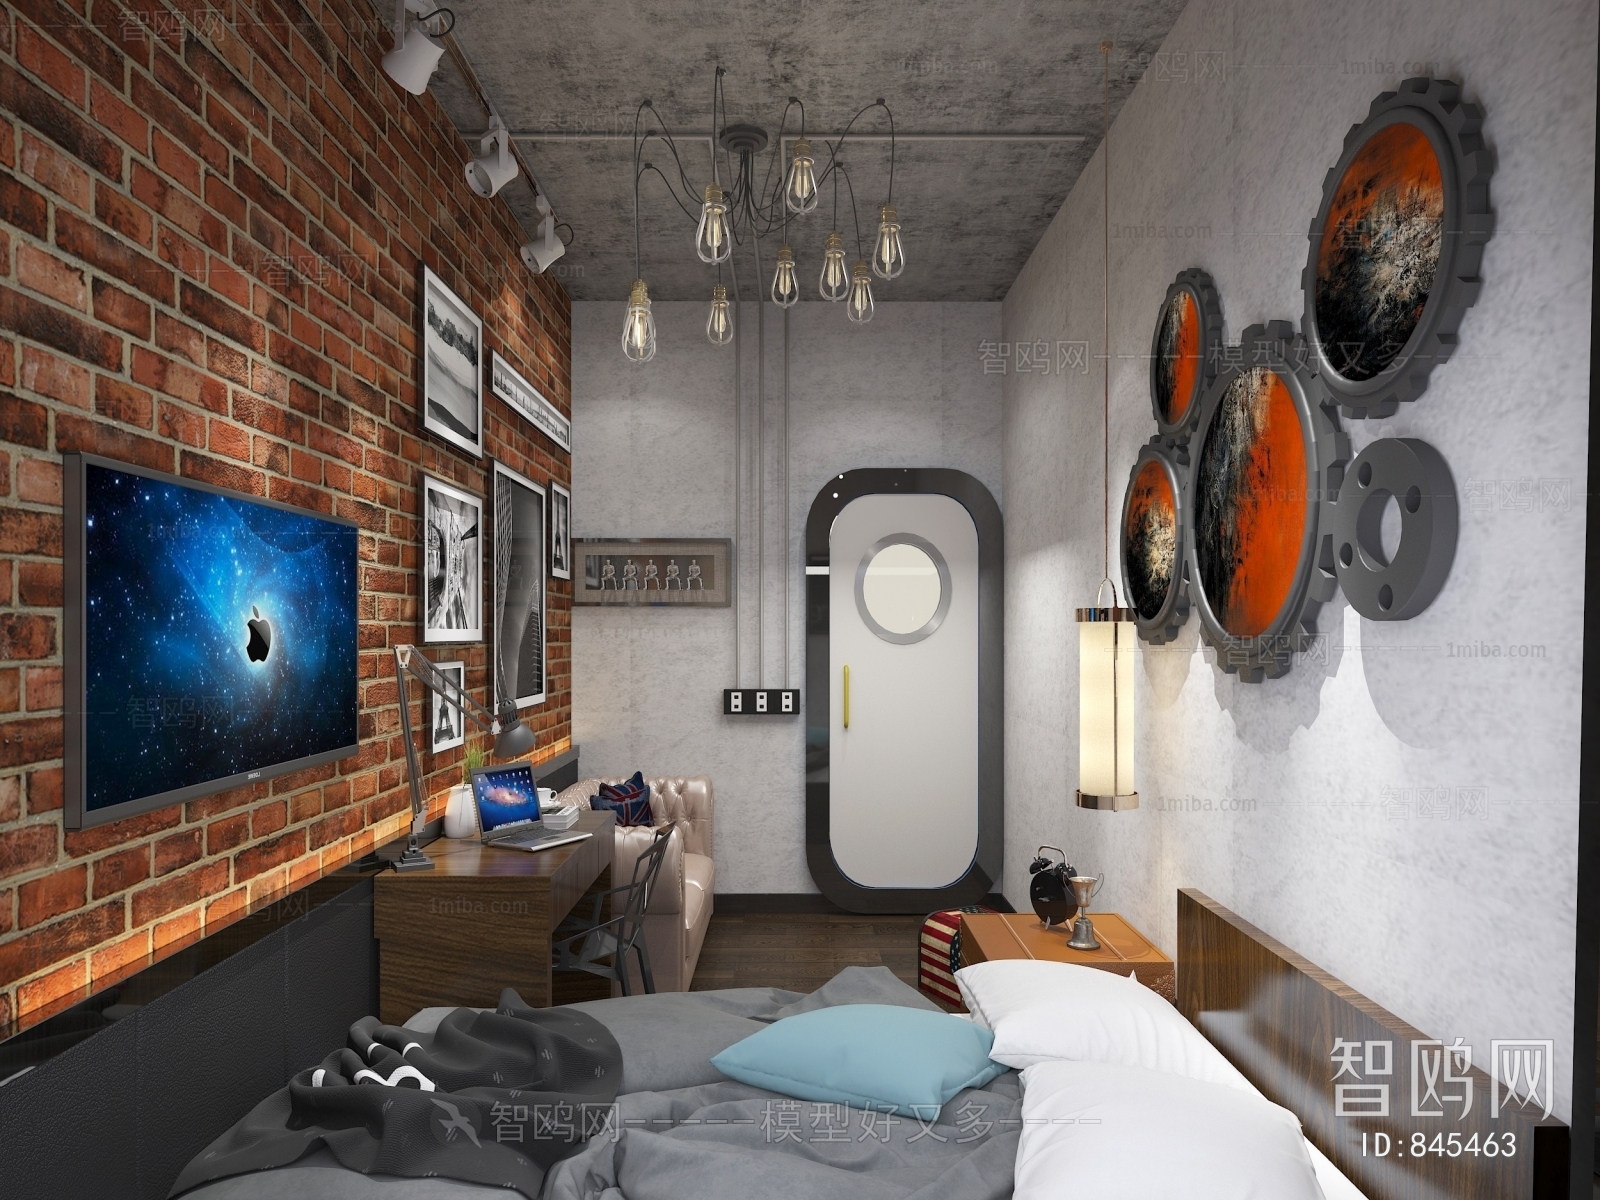 Industrial Style Guest Room